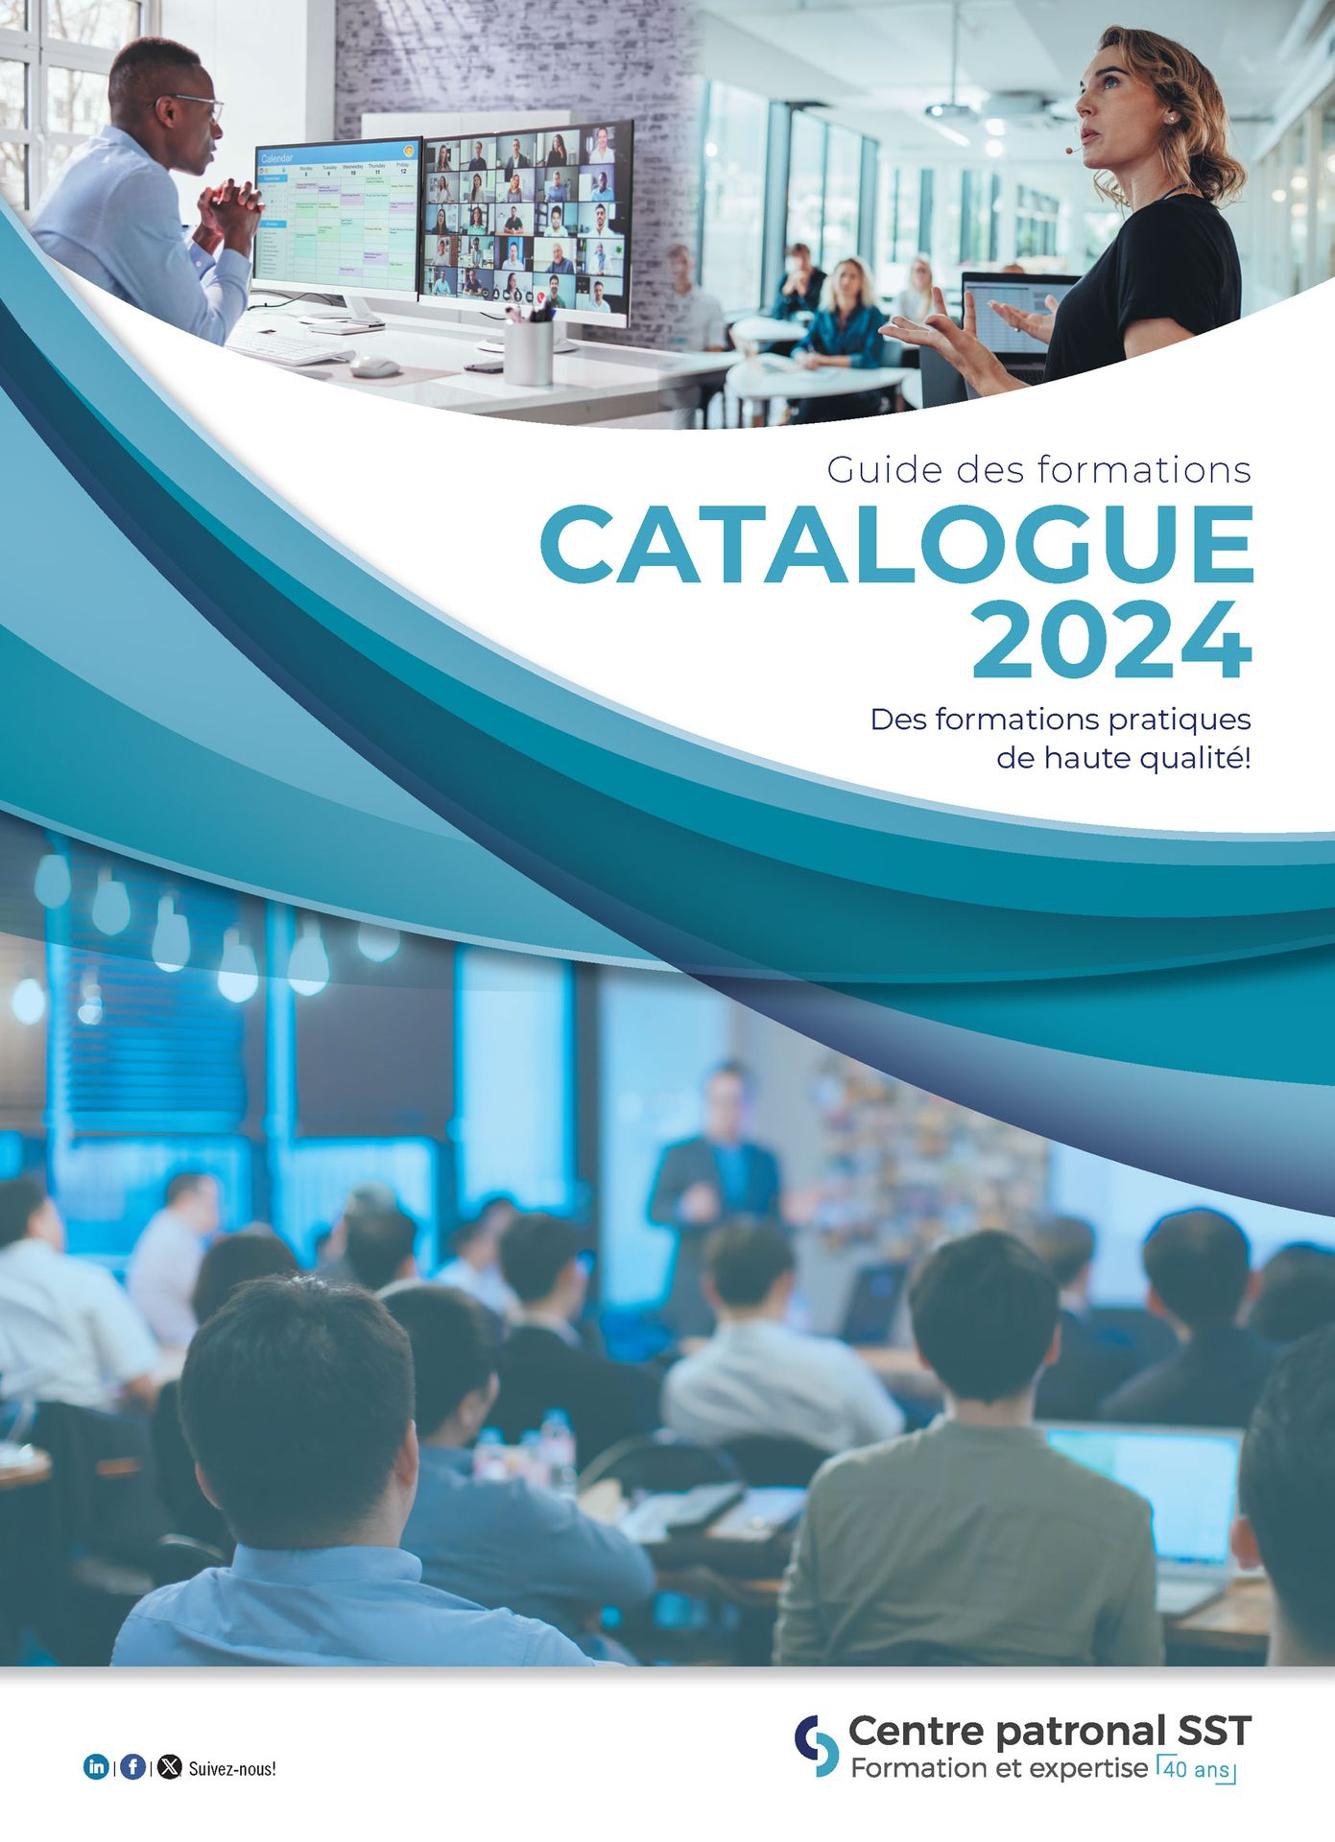 Guide formations - Catalogue 2024